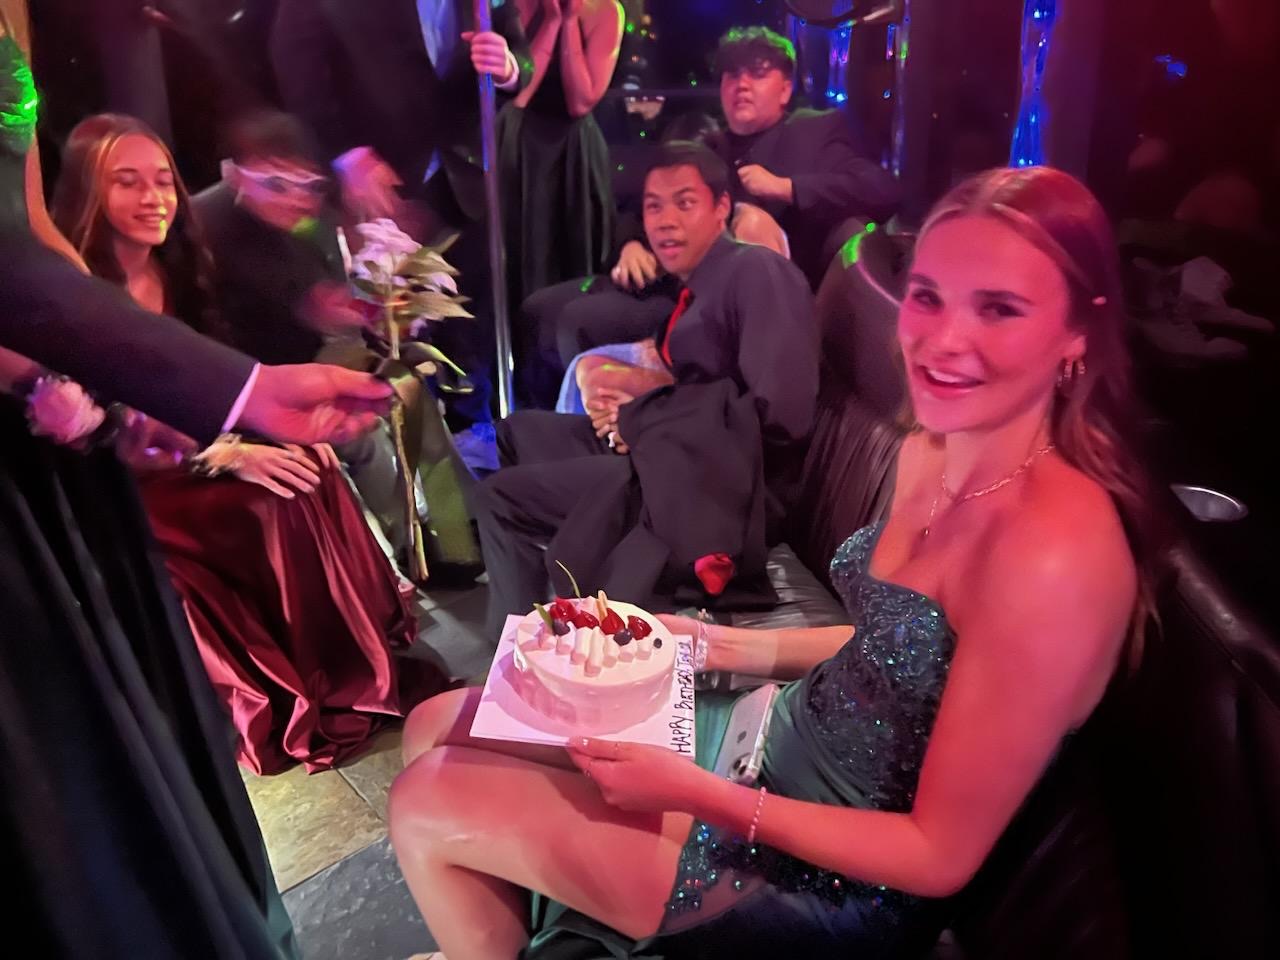 Girl on party bus with her friends holding a birthday cake